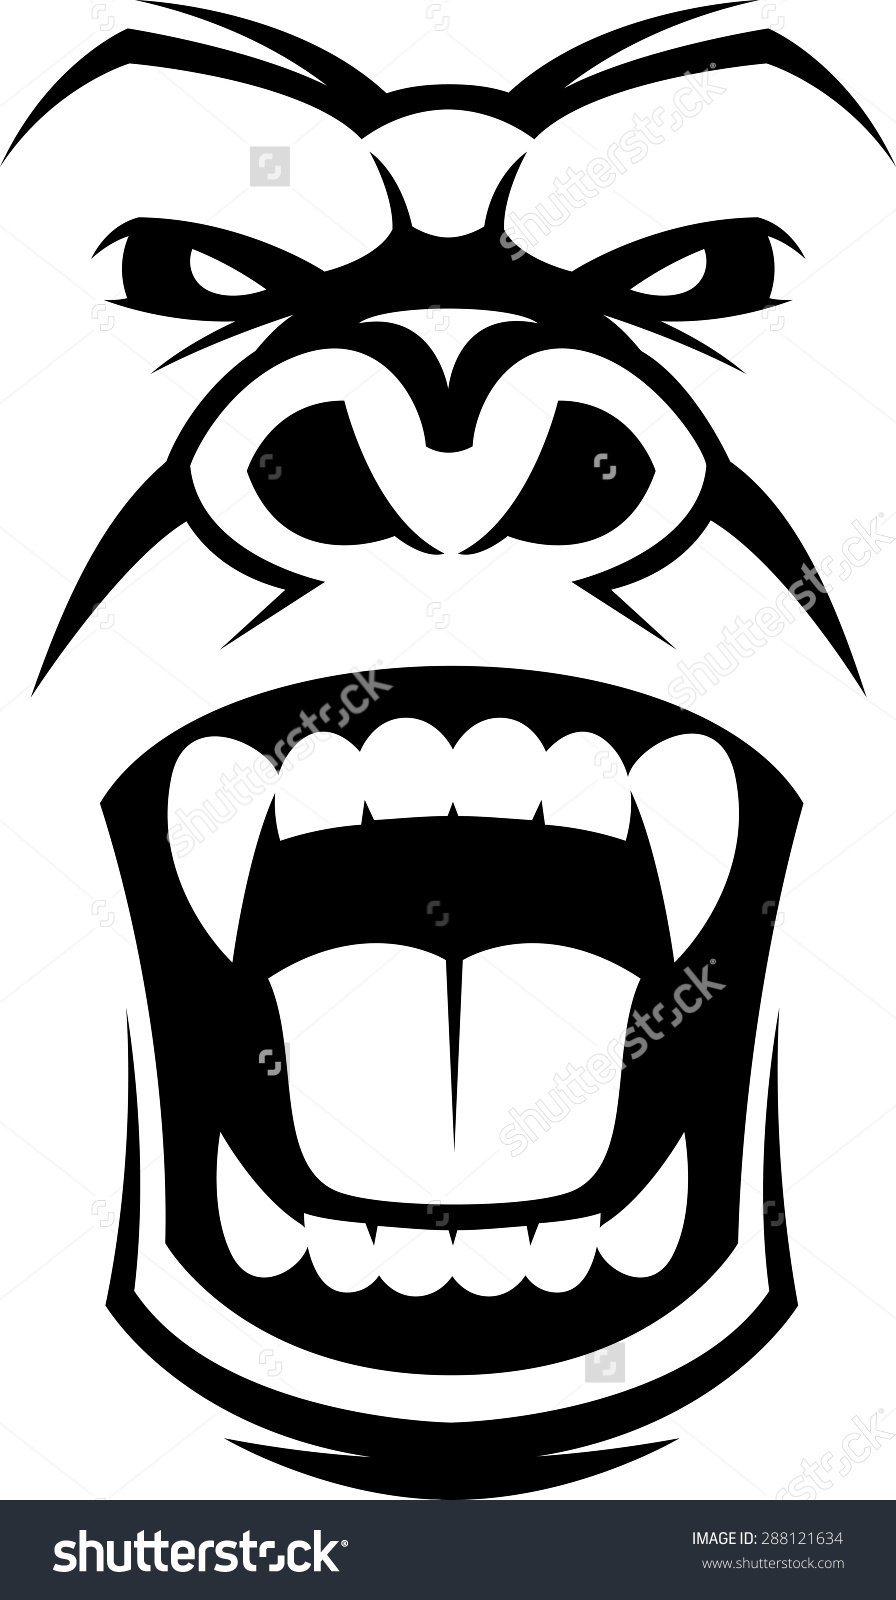 Ape clipart gorilla face. Drawing china cps